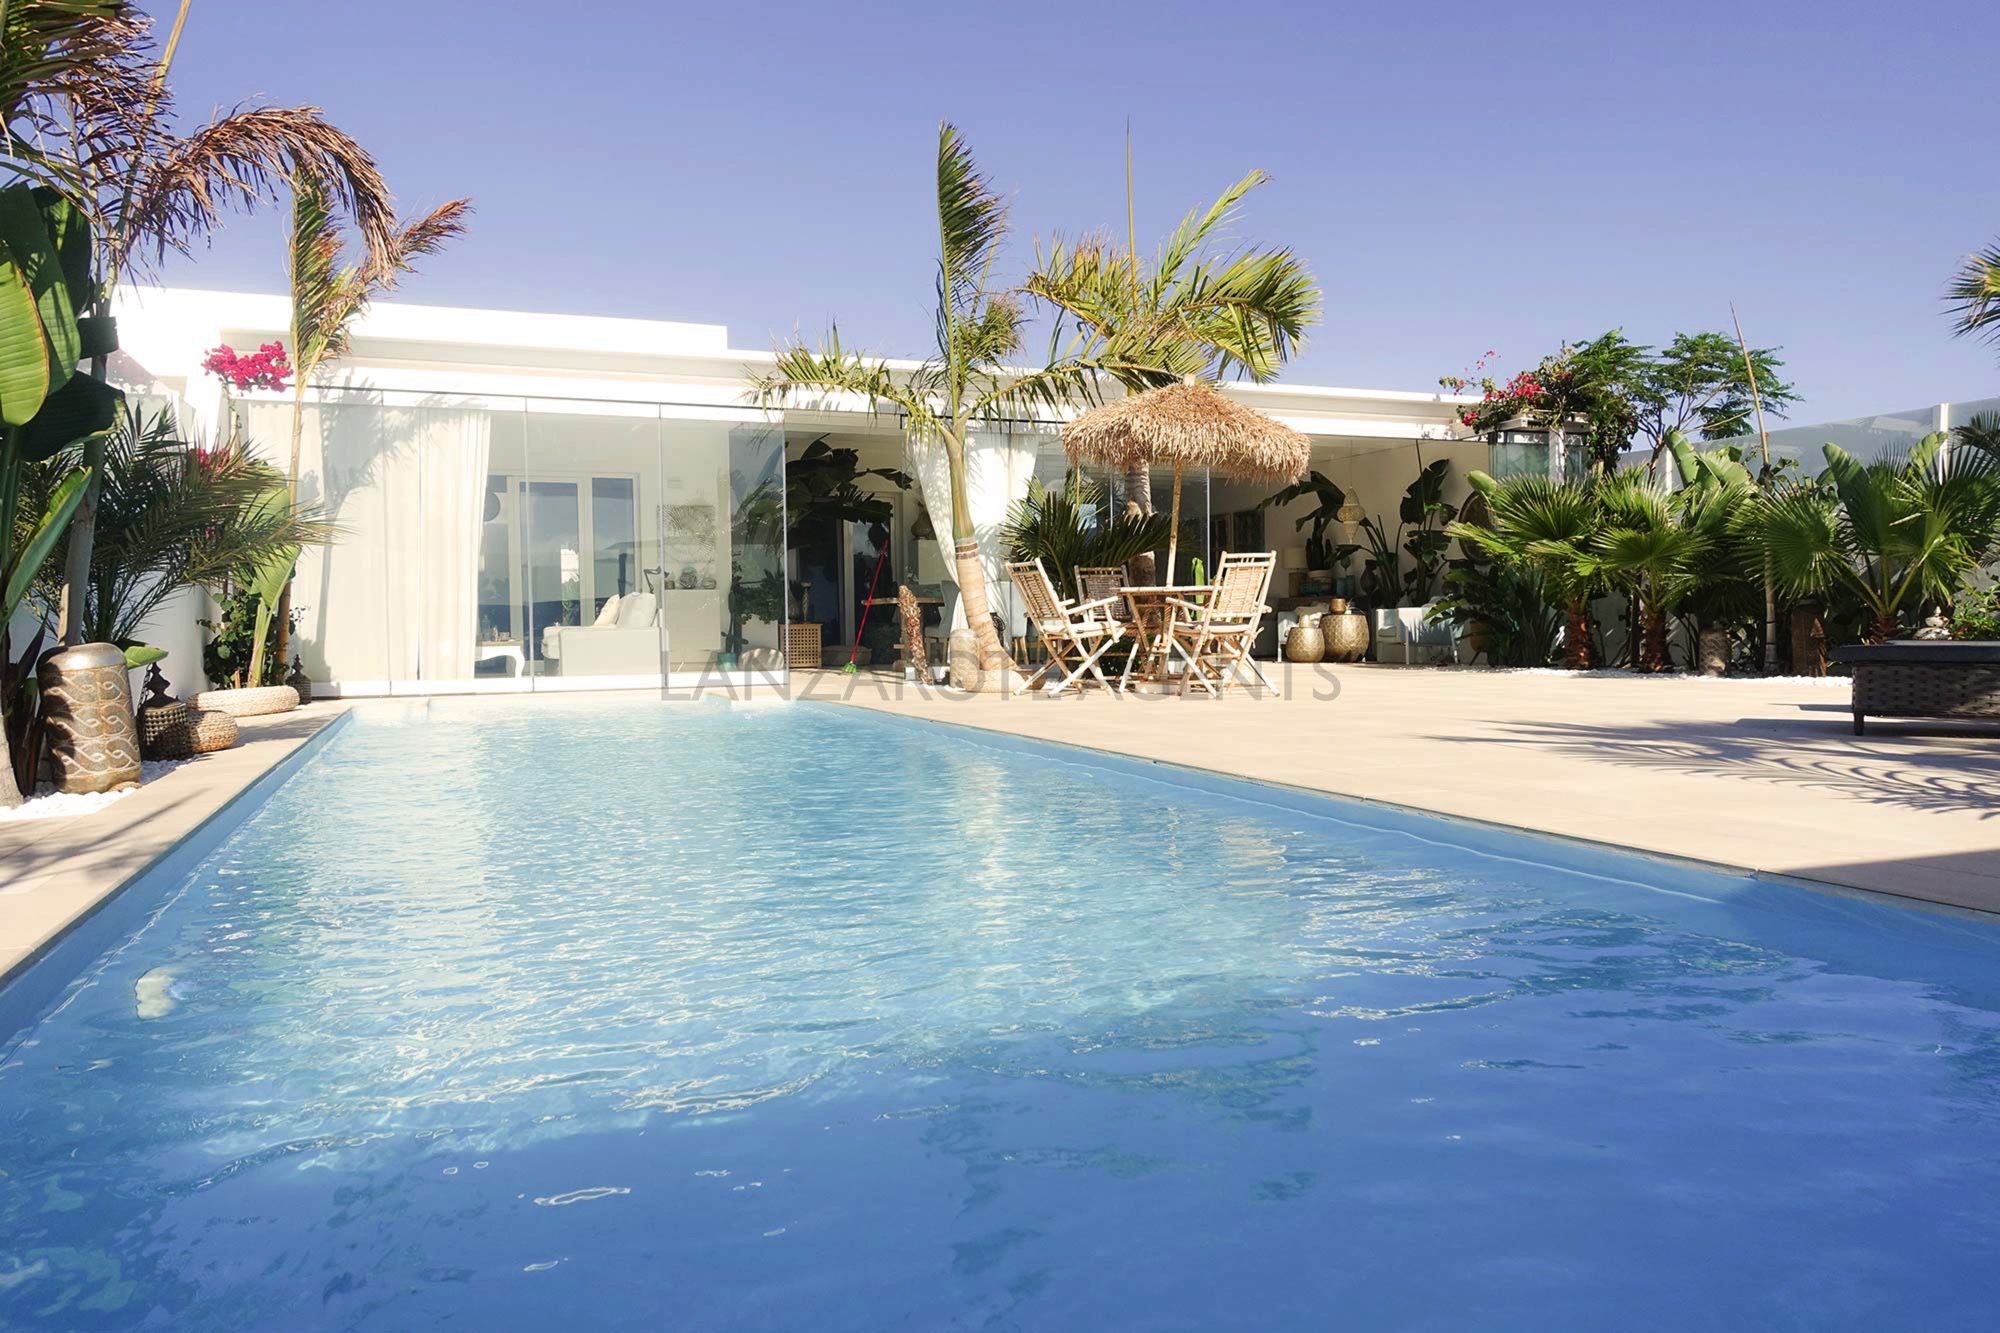 Luxury Tropical Garden Modern Villa for sale in Lanzarote With Massive Private Heated Pool in Playa Blanca